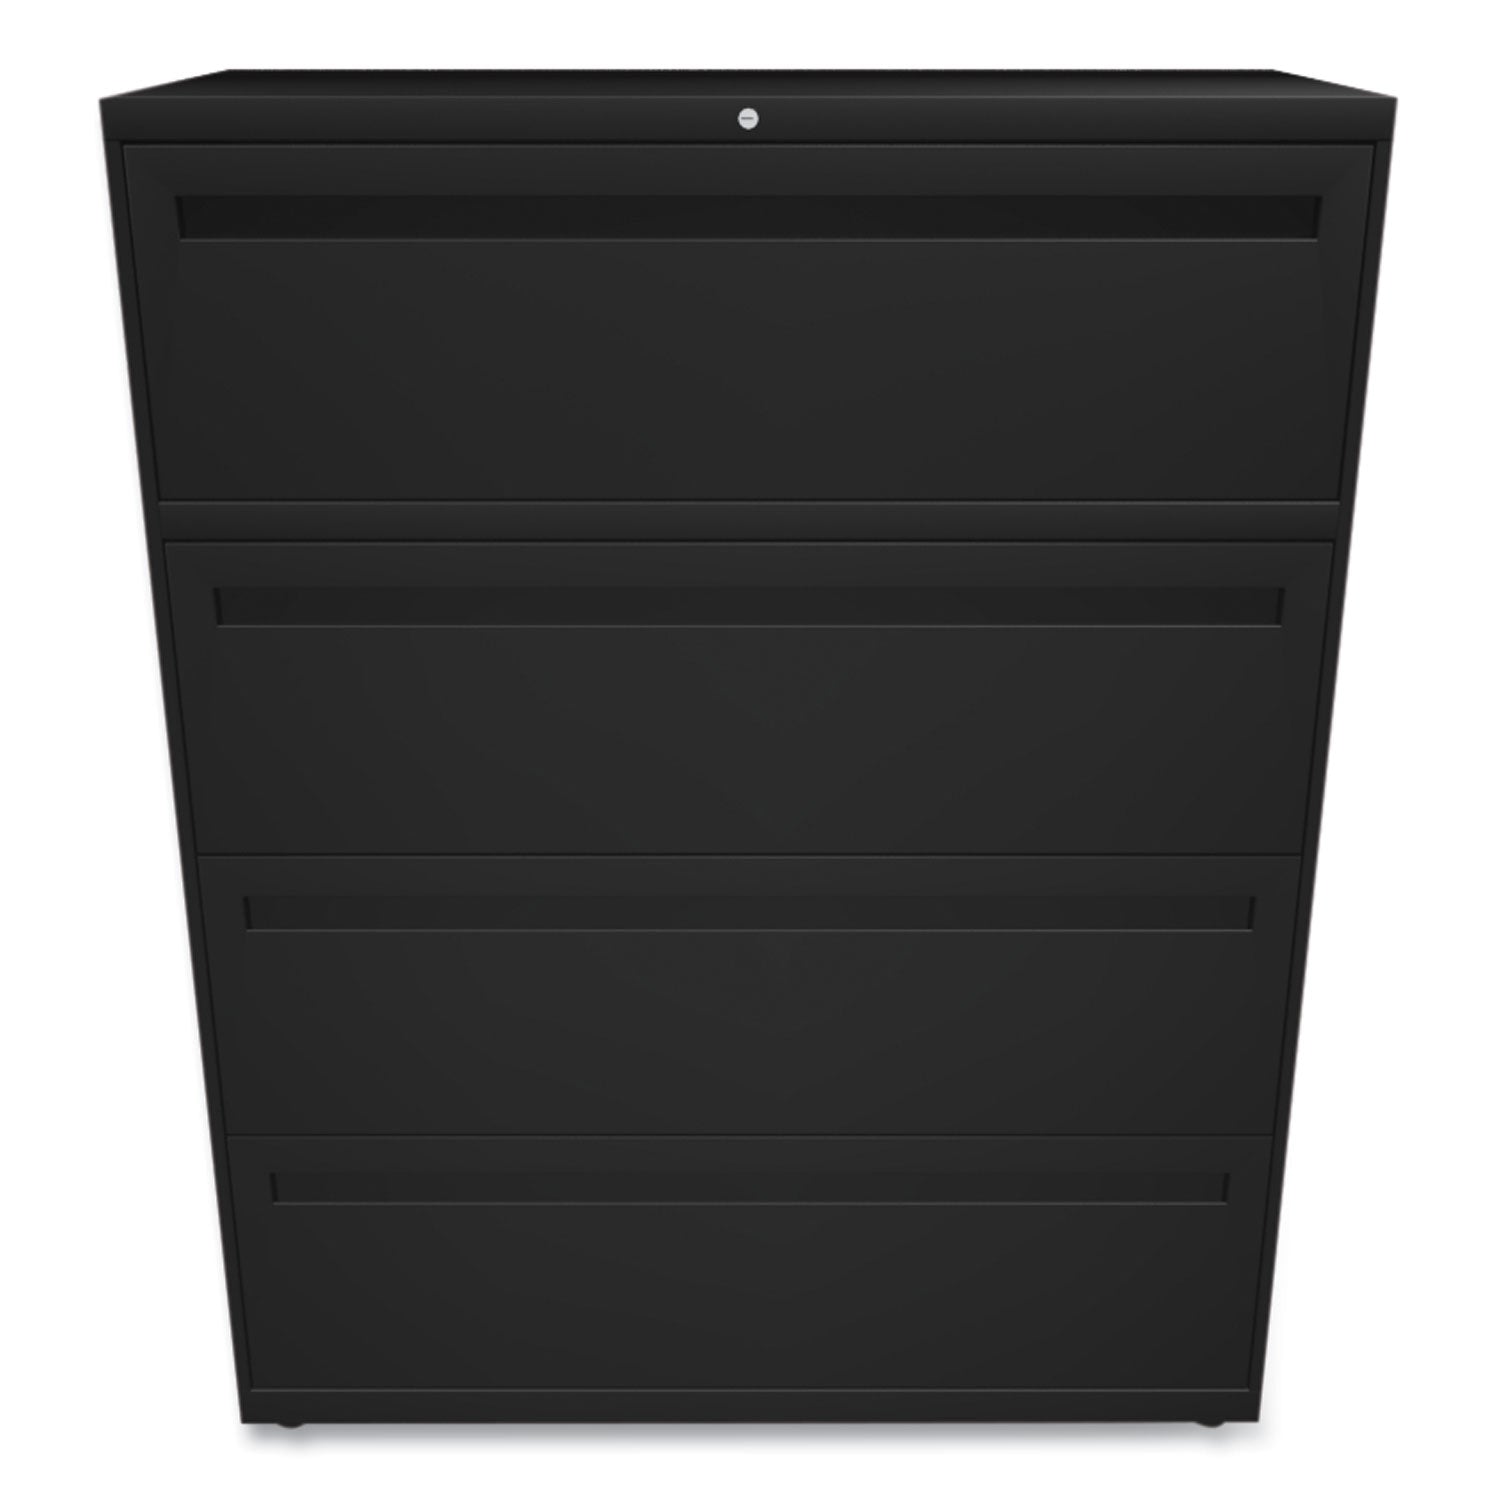 Brigade 700 Series Lateral File, 4 Legal/Letter-Size File Drawers, Black, 42" x 18" x 52.5 - 